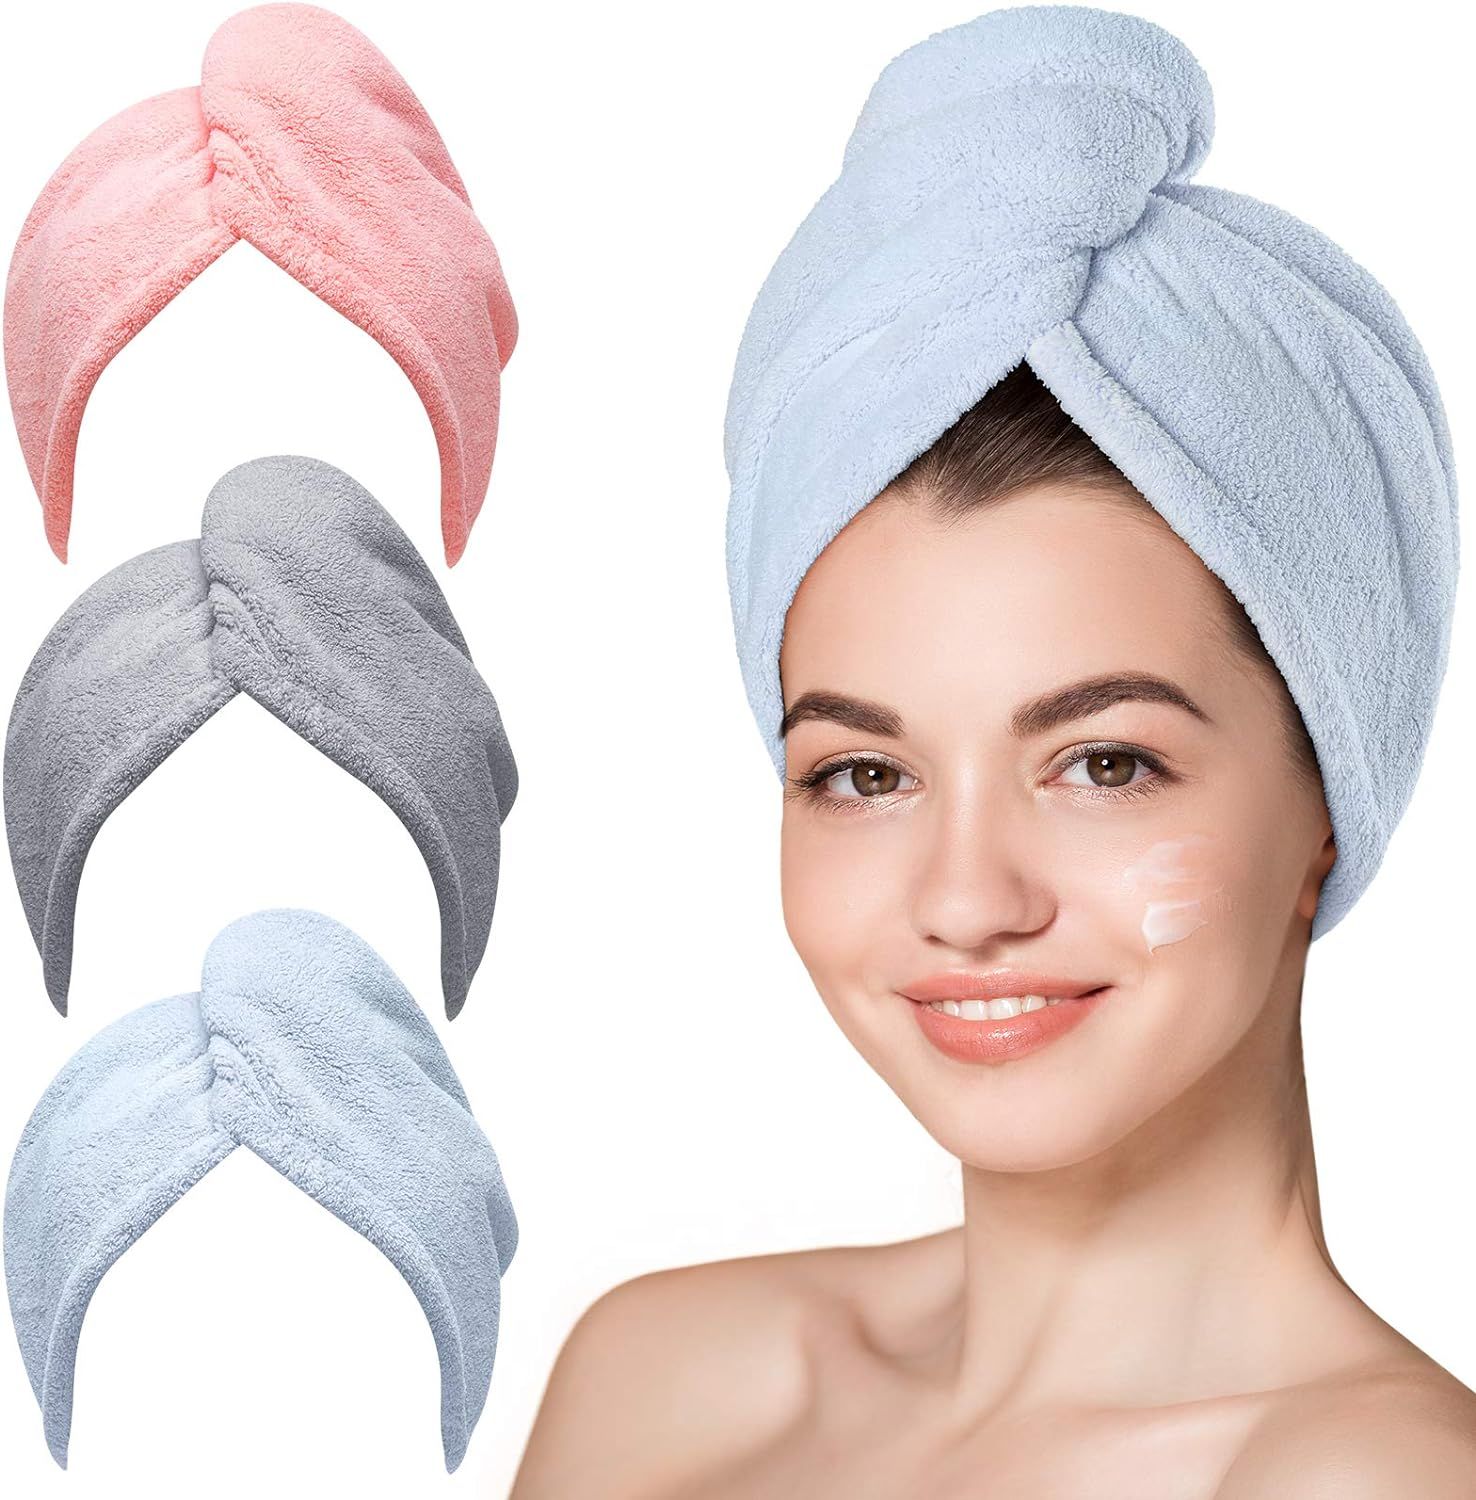 10 Best Hair Drying Towels for Quick and Gentle Drying